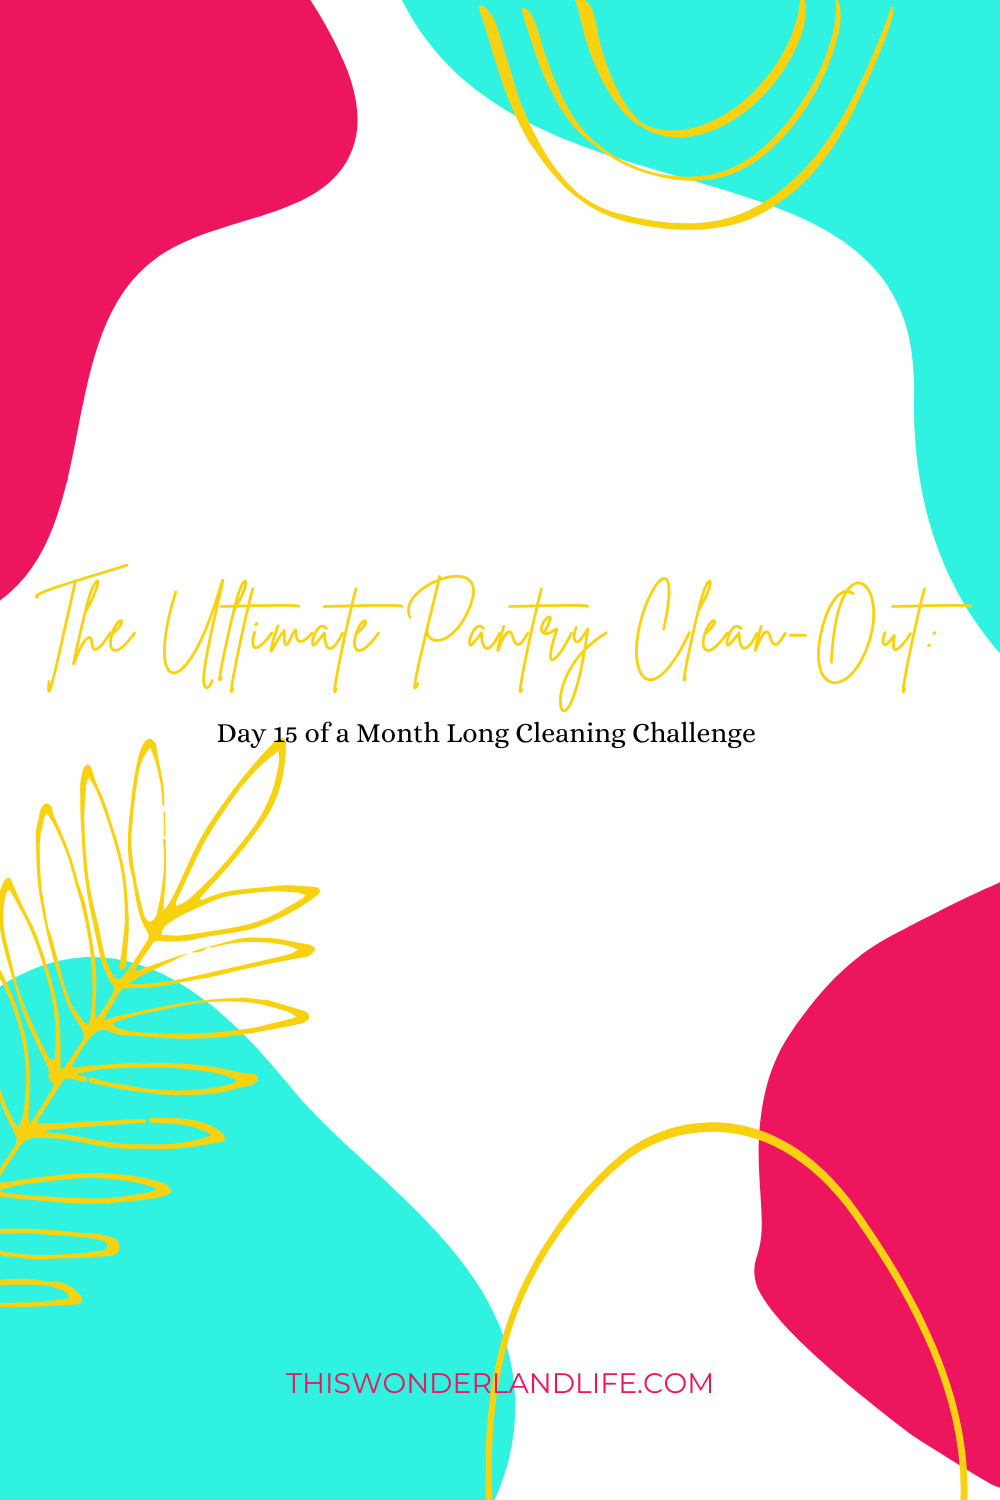 The Ultimate Pantry Clean-Out: Day 15 of a Month Long Cleaning Challenge